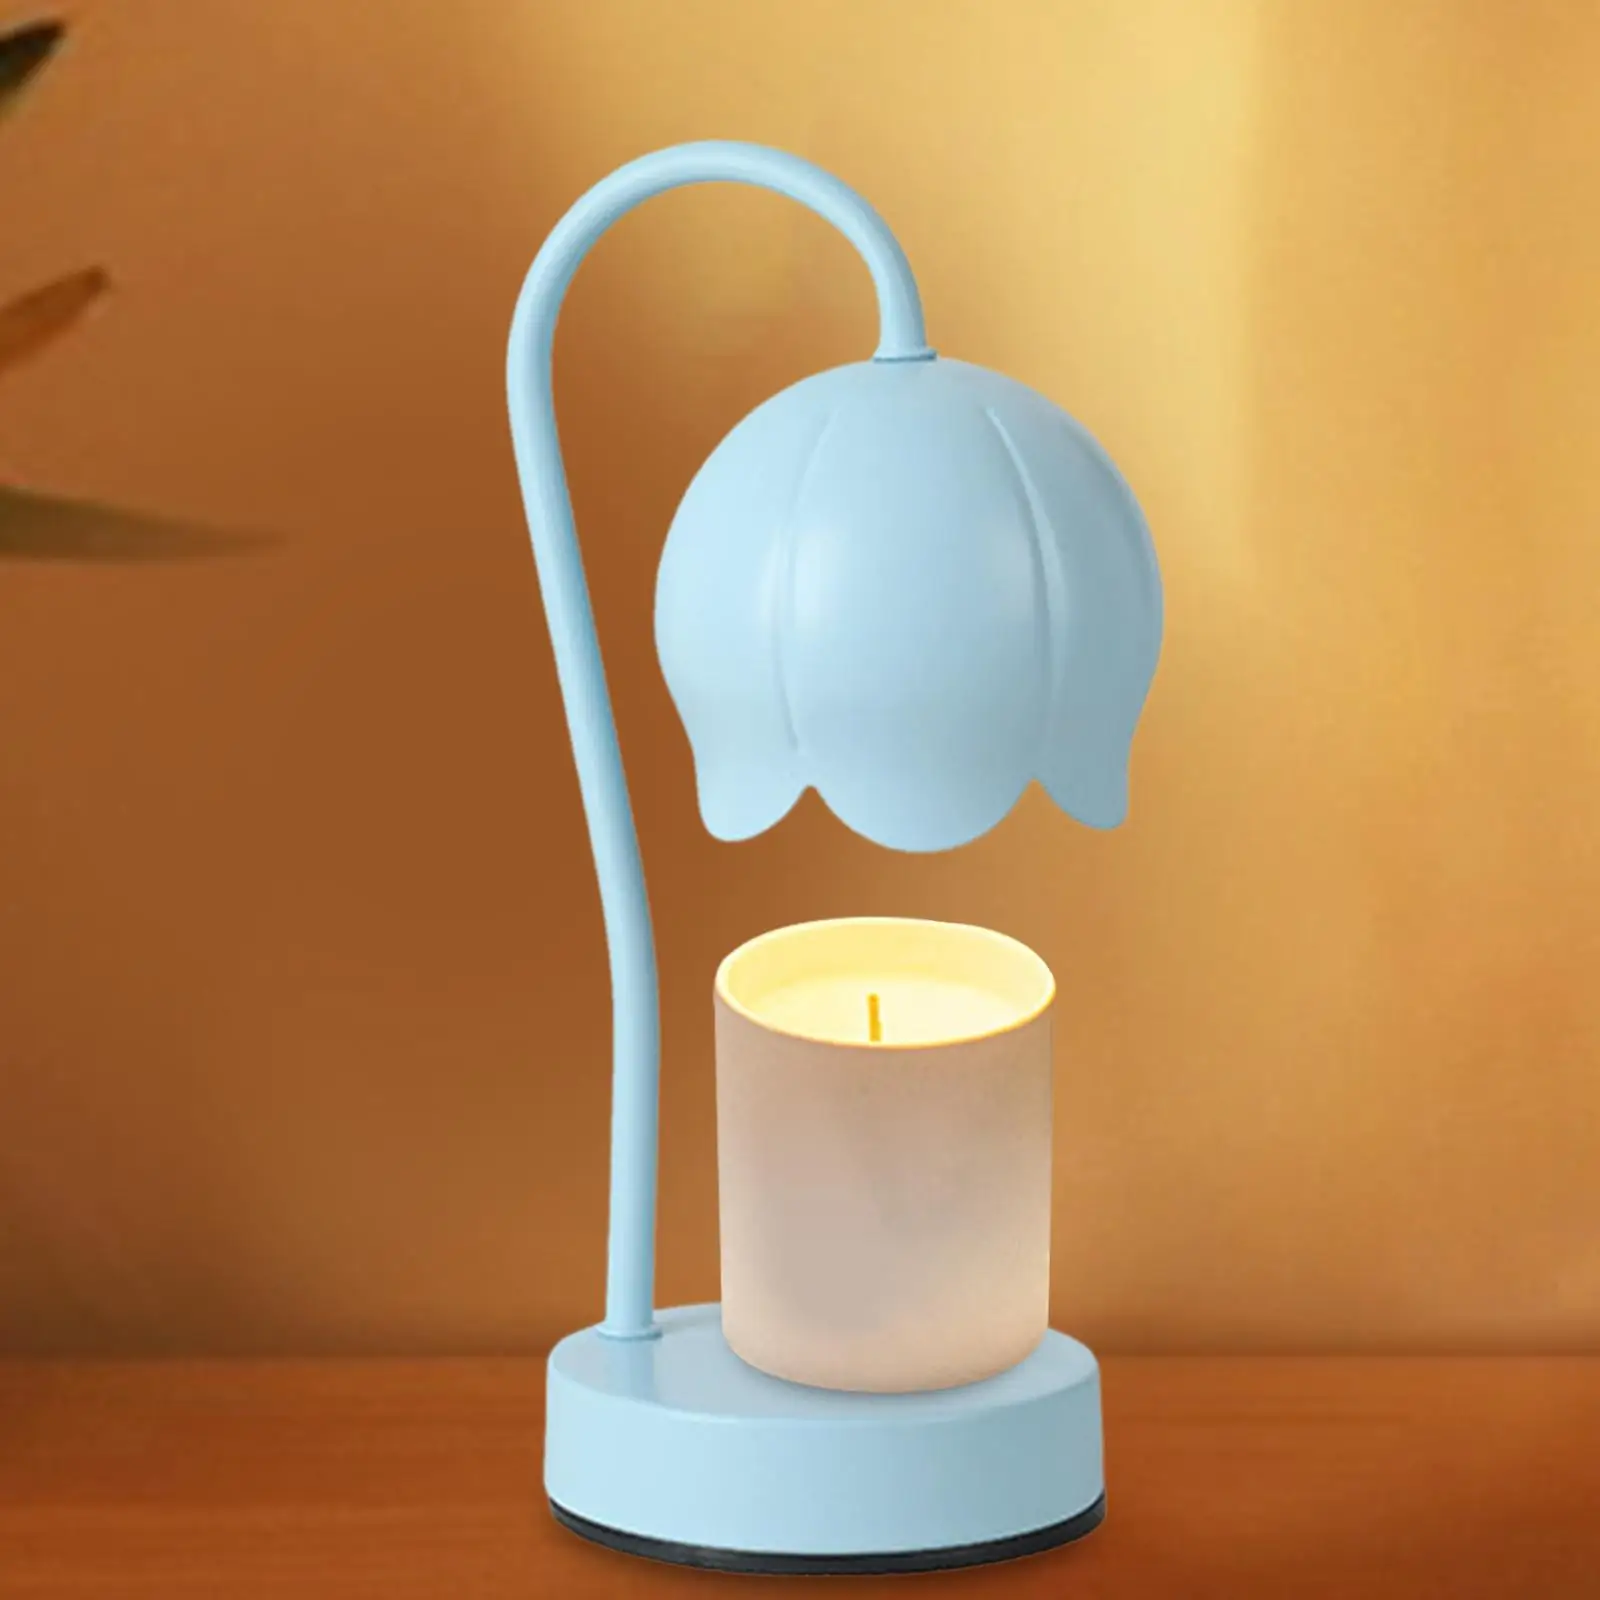 No Flame Candle Warmer Lamp Aromatic Candle Holders Burner Melter Lamp Candle Heater Lamp for Bar Office Tabletop Birthday Gift